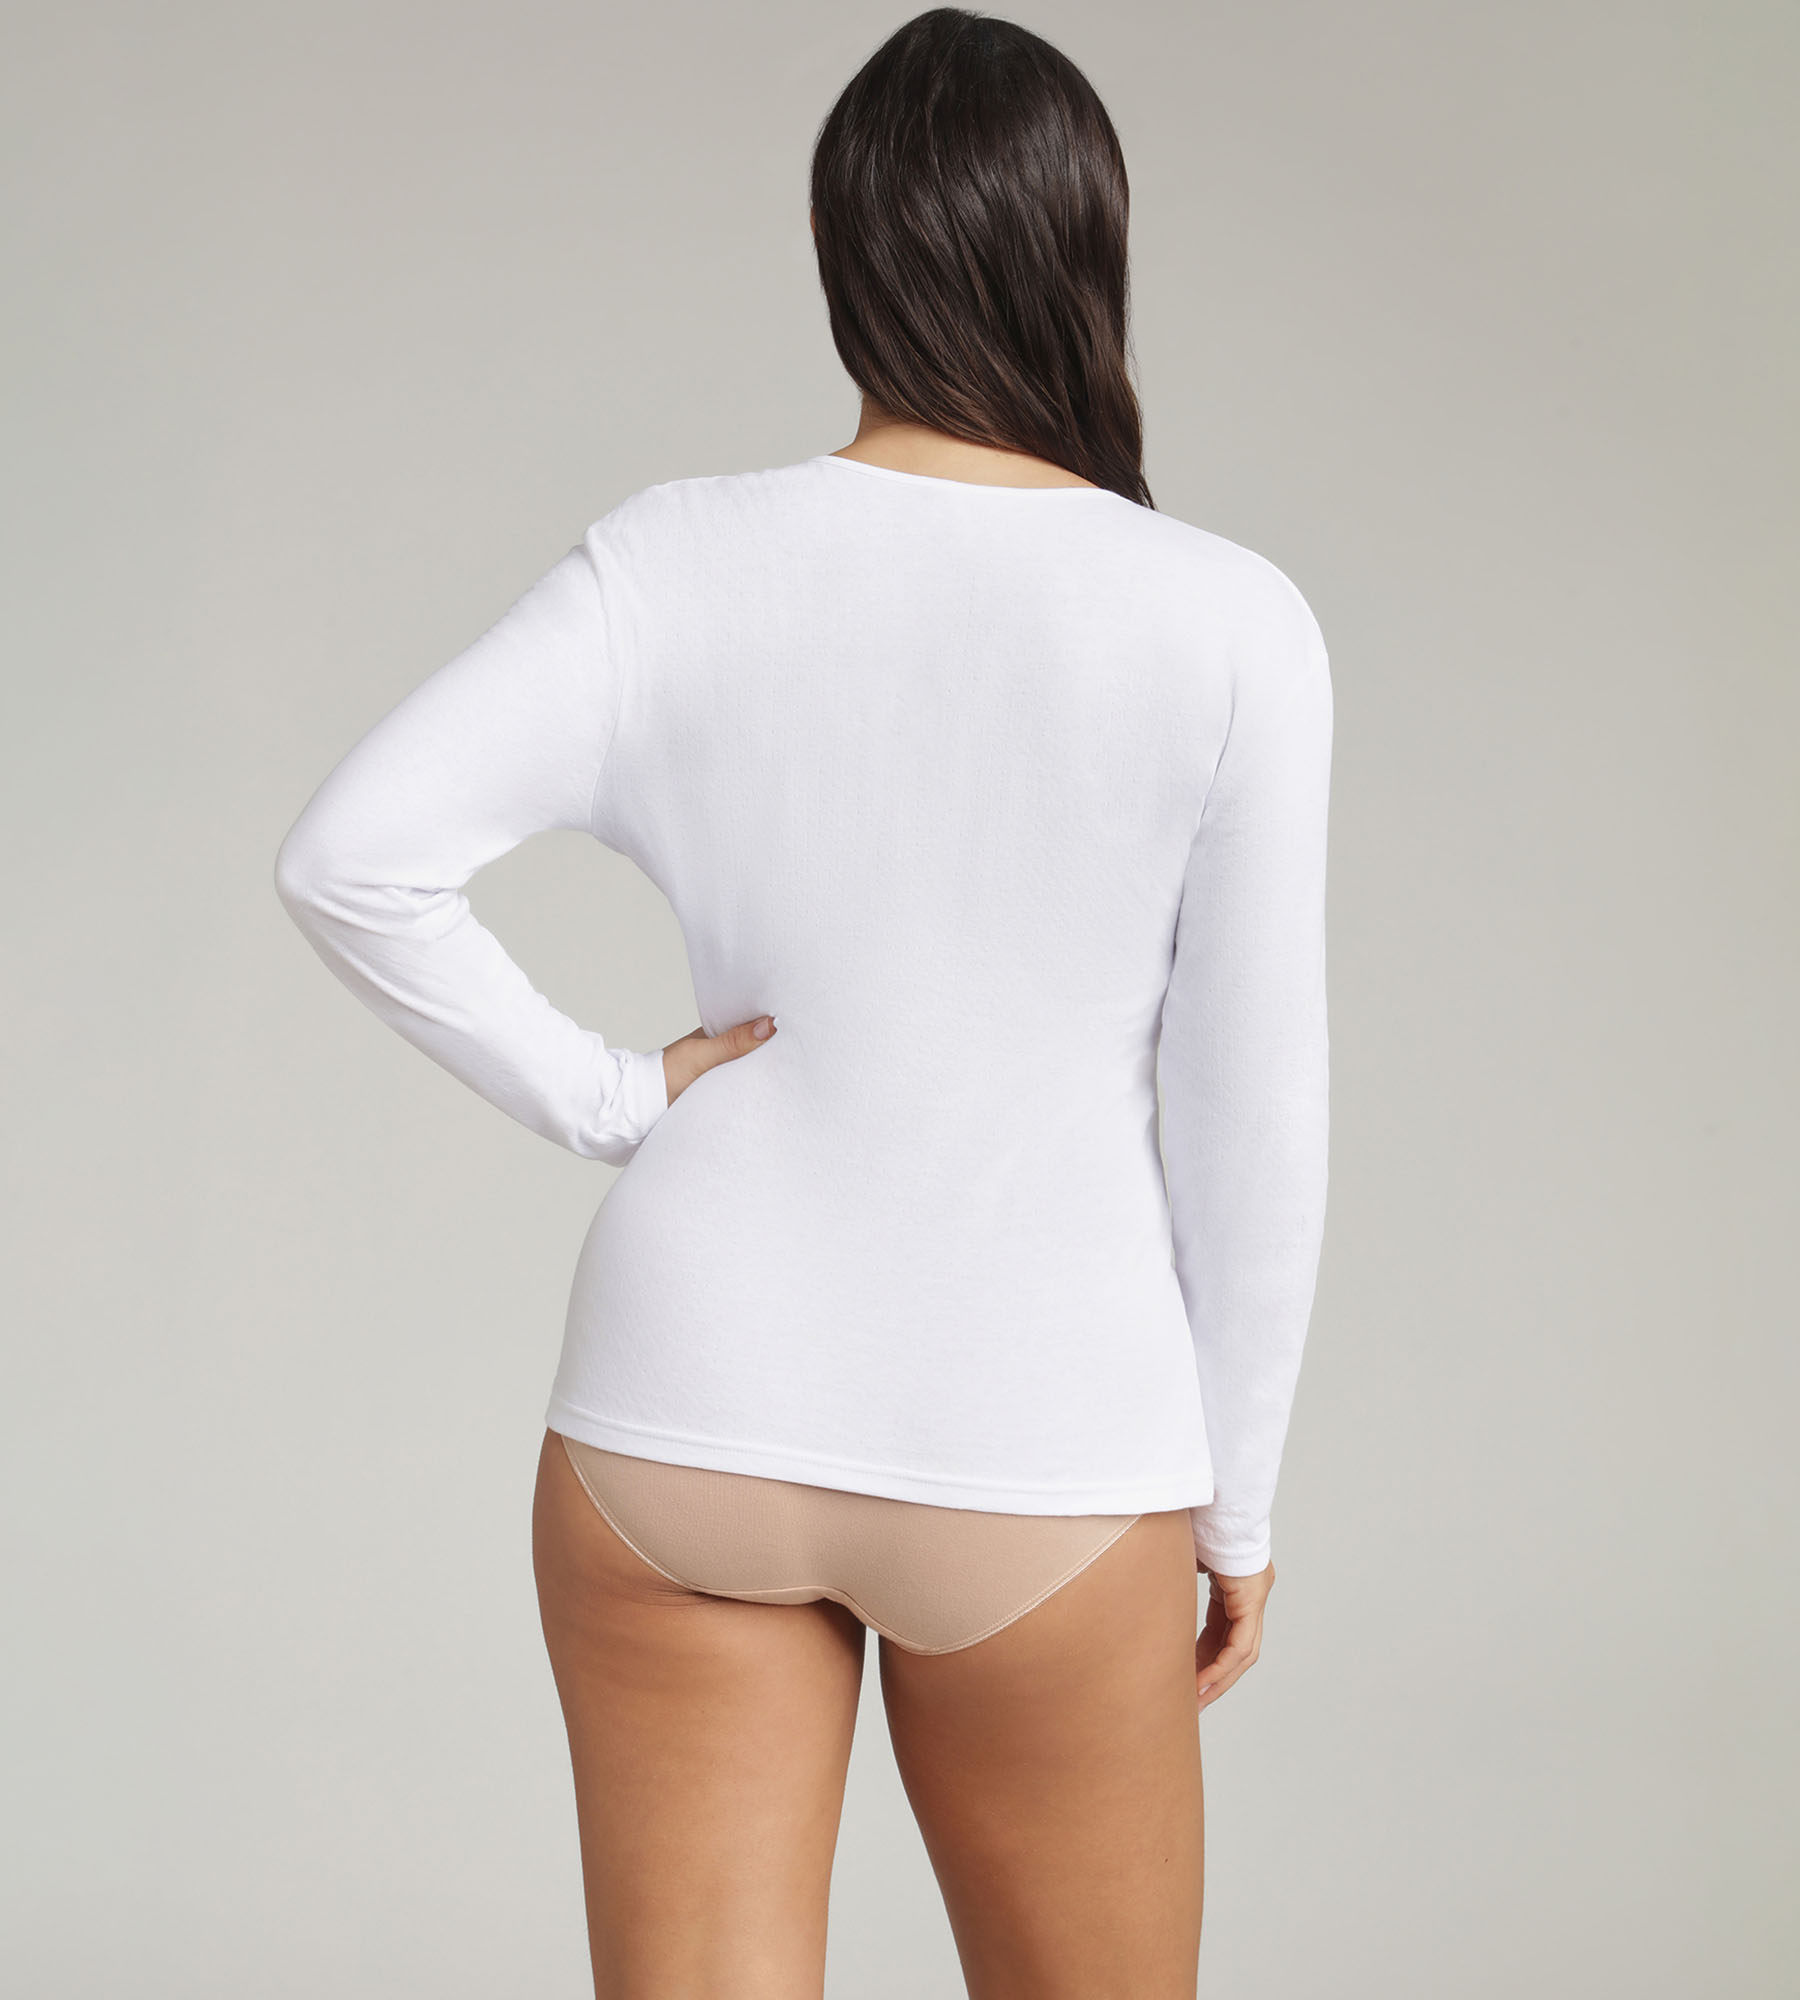 Long-sleeved t-shirt in white Thermal Natural, , PLAYTEX